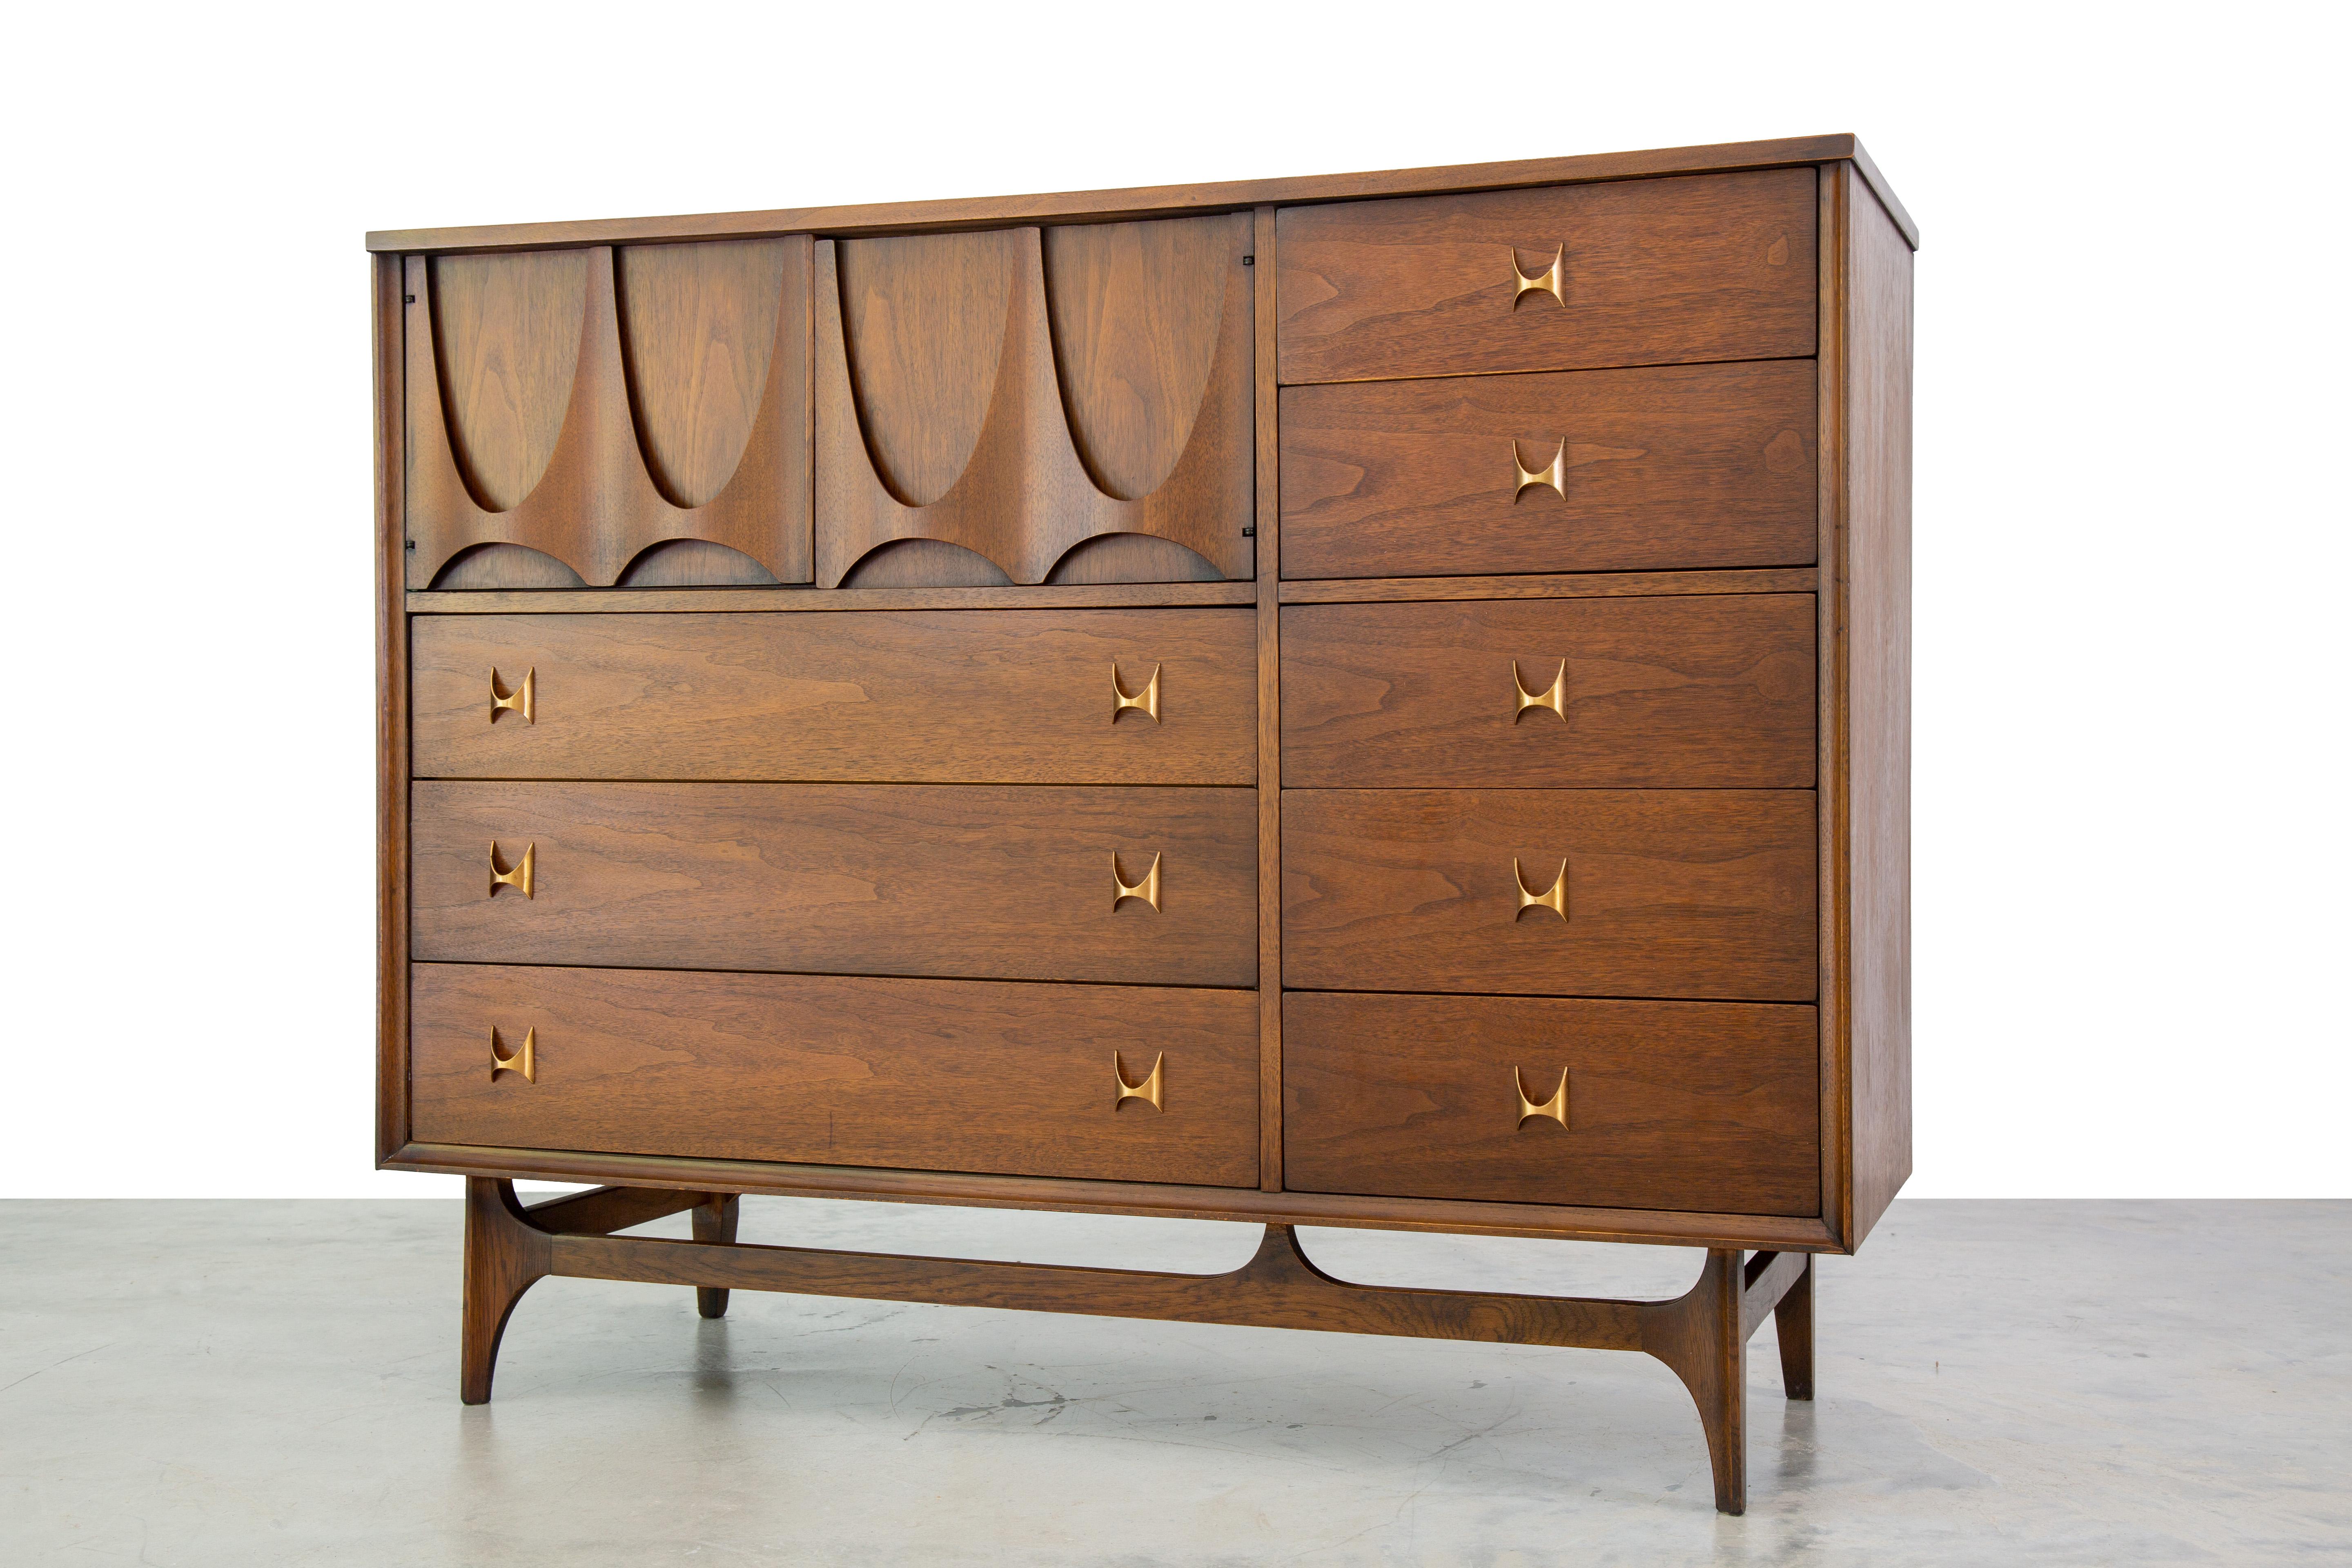 The magna chest in the Broyhill Brasilia line is one of the most coveted items of the mid century modern era. Plenty of storage can be found in the 8 drawers. Two doors on the upper left cancel a compartment with two dividers that offer even more